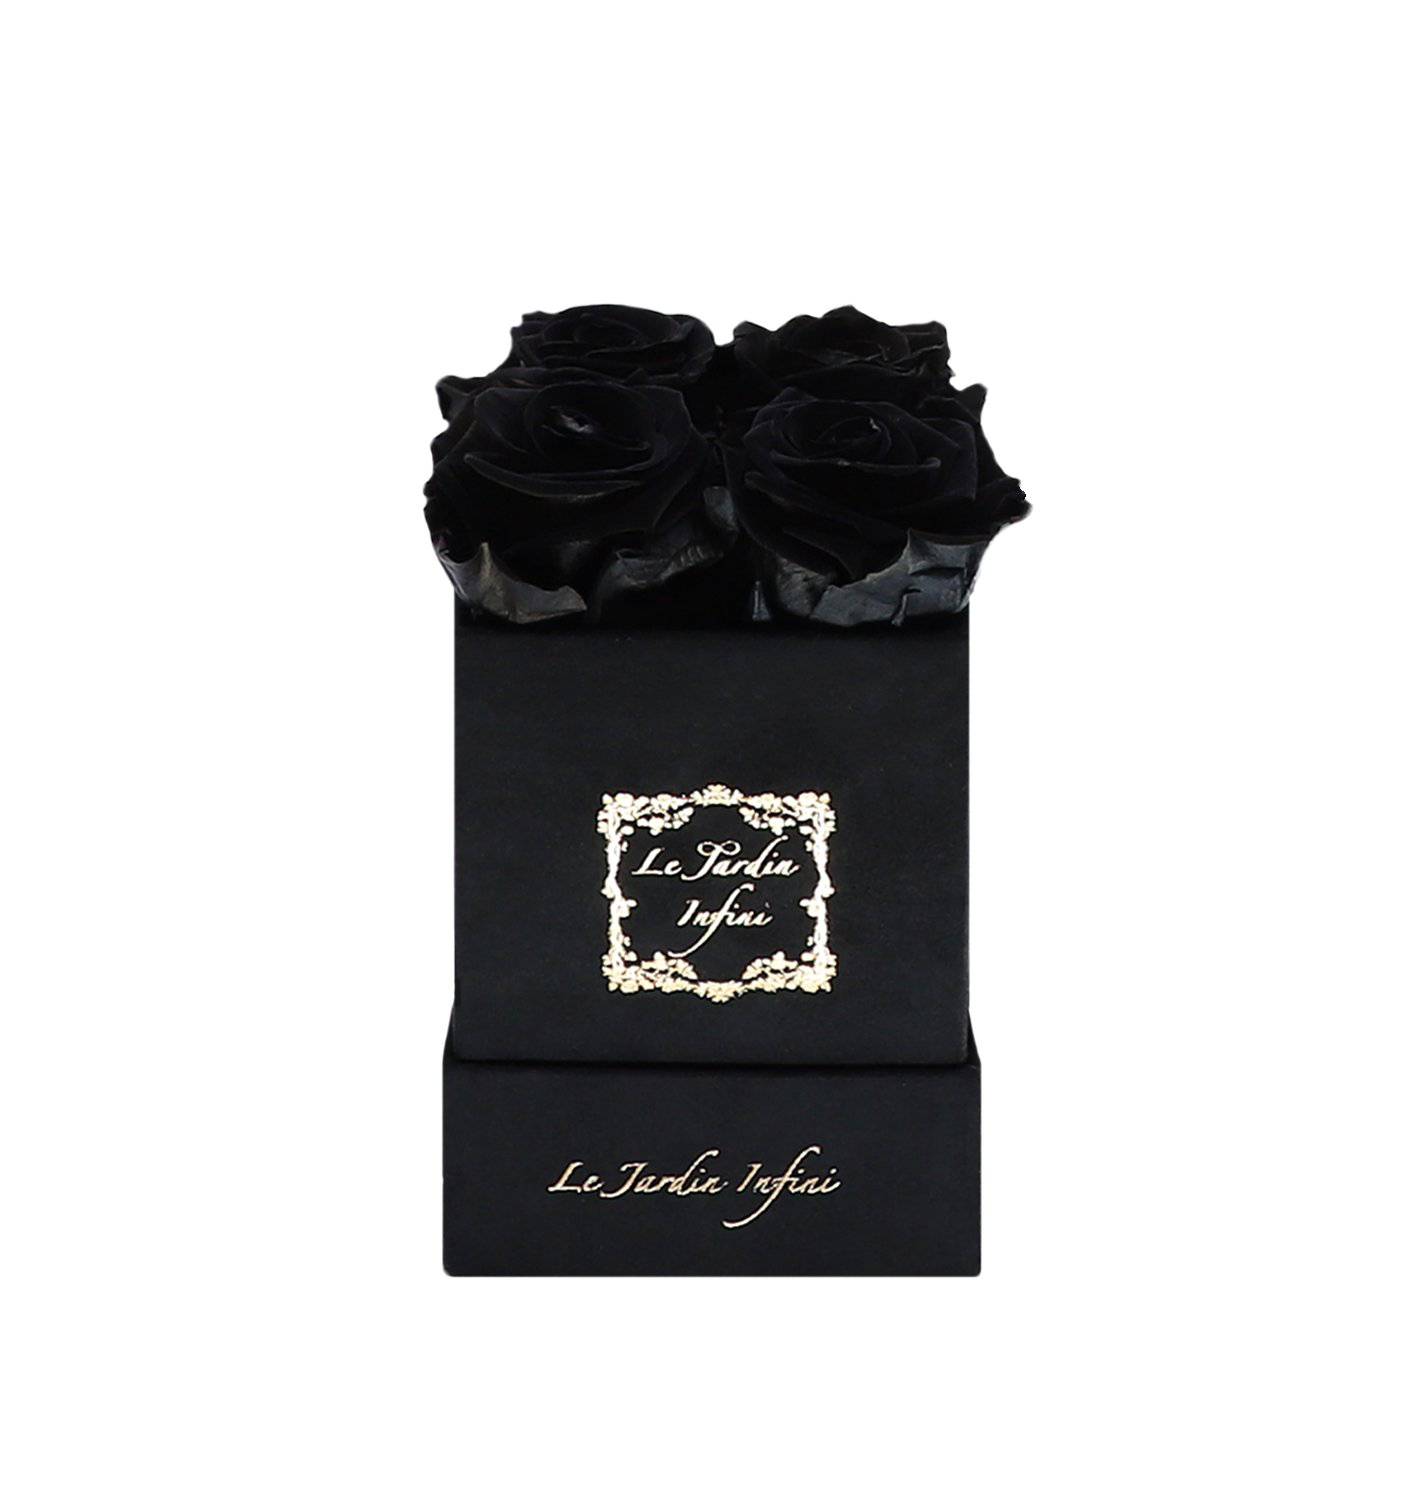 Black Preserved Roses - Small Square Black Suede Box - Le Jardin Infini Roses in a Box